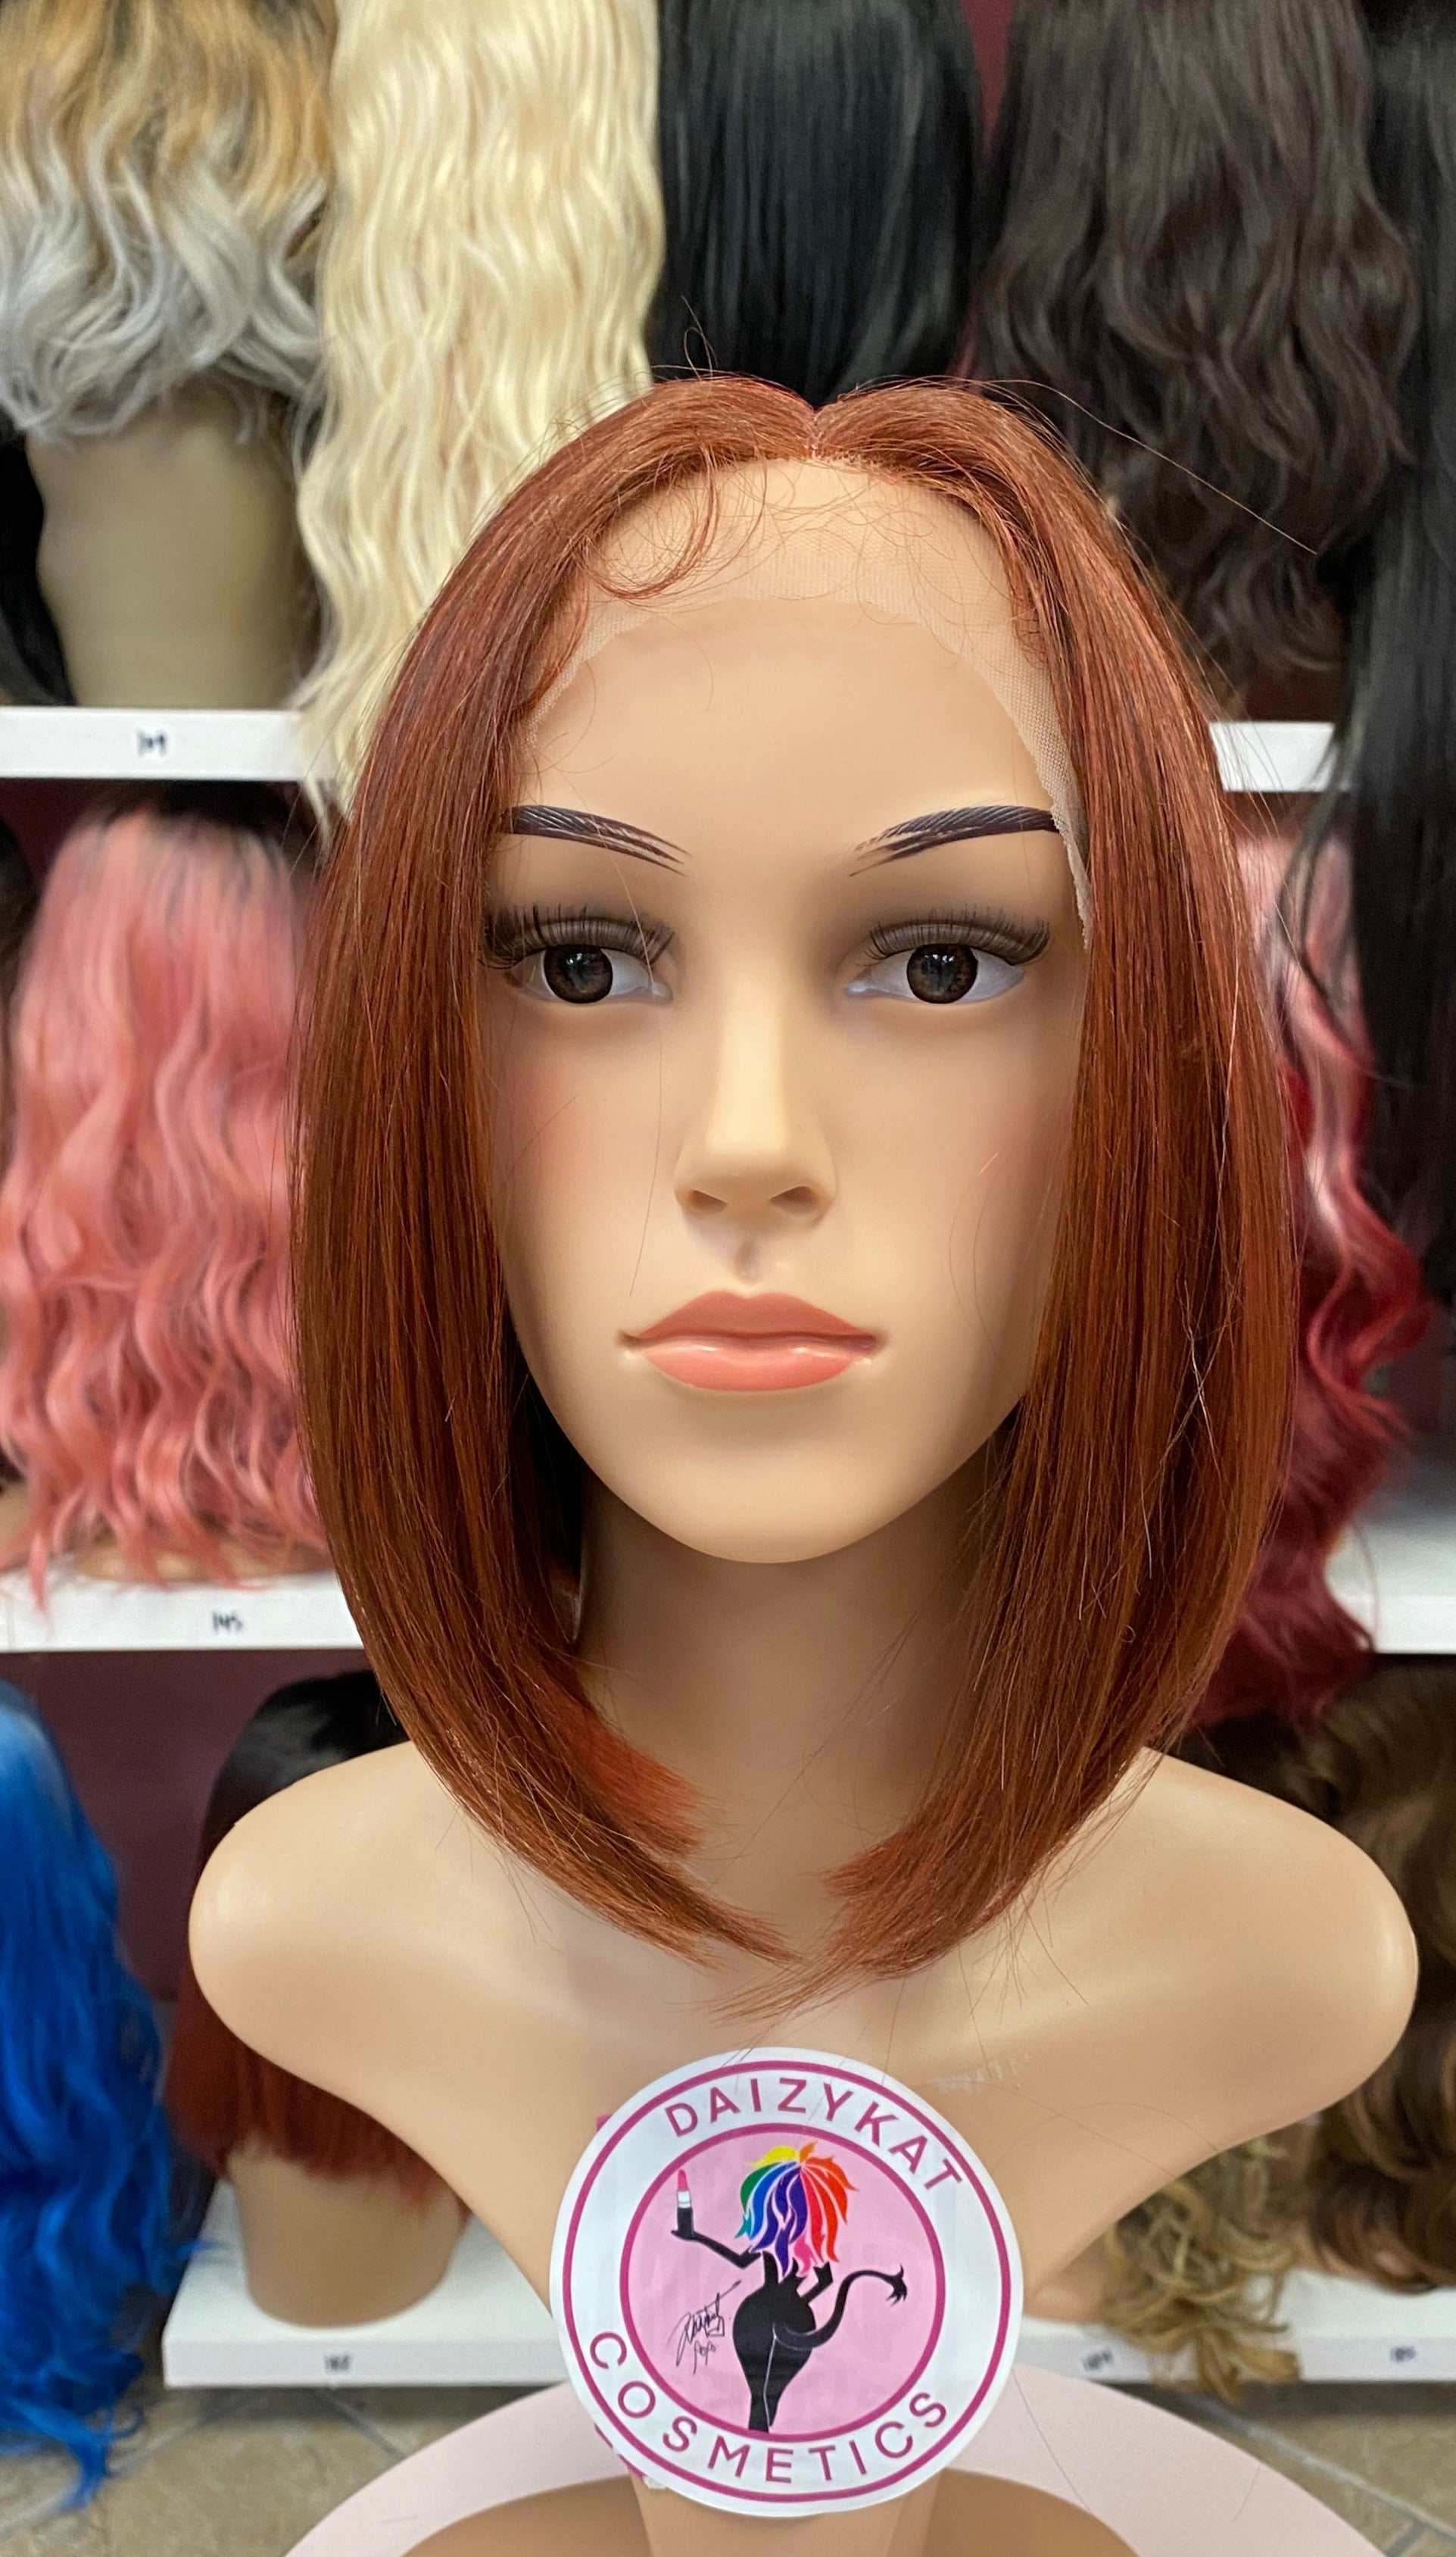 31 CHA CHA - Middle Part Lace Front Wig - RED/COPPER - DaizyKat Cosmetics 31 CHA CHA - Middle Part Lace Front Wig - RED/COPPER DaizyKat Cosmetics Wigs